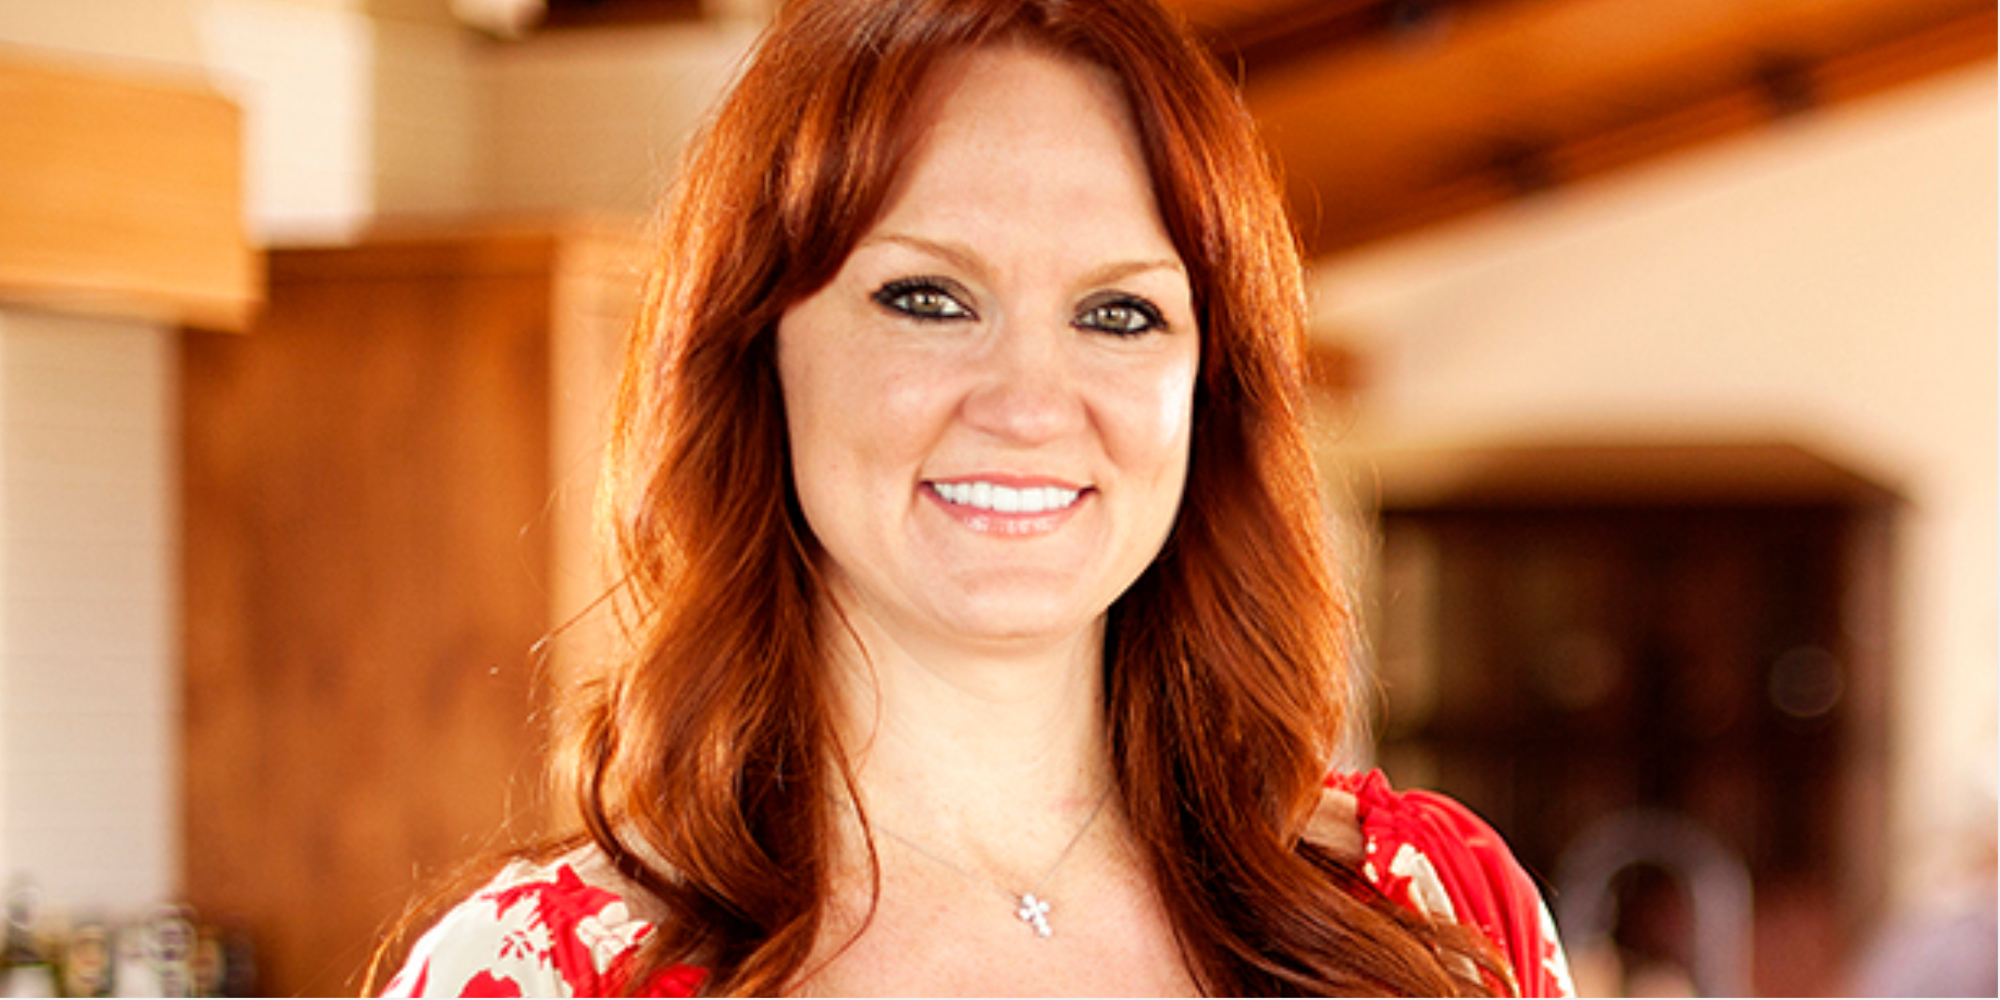 Ree Drummond poses in her dressing room kitchen on the set of 